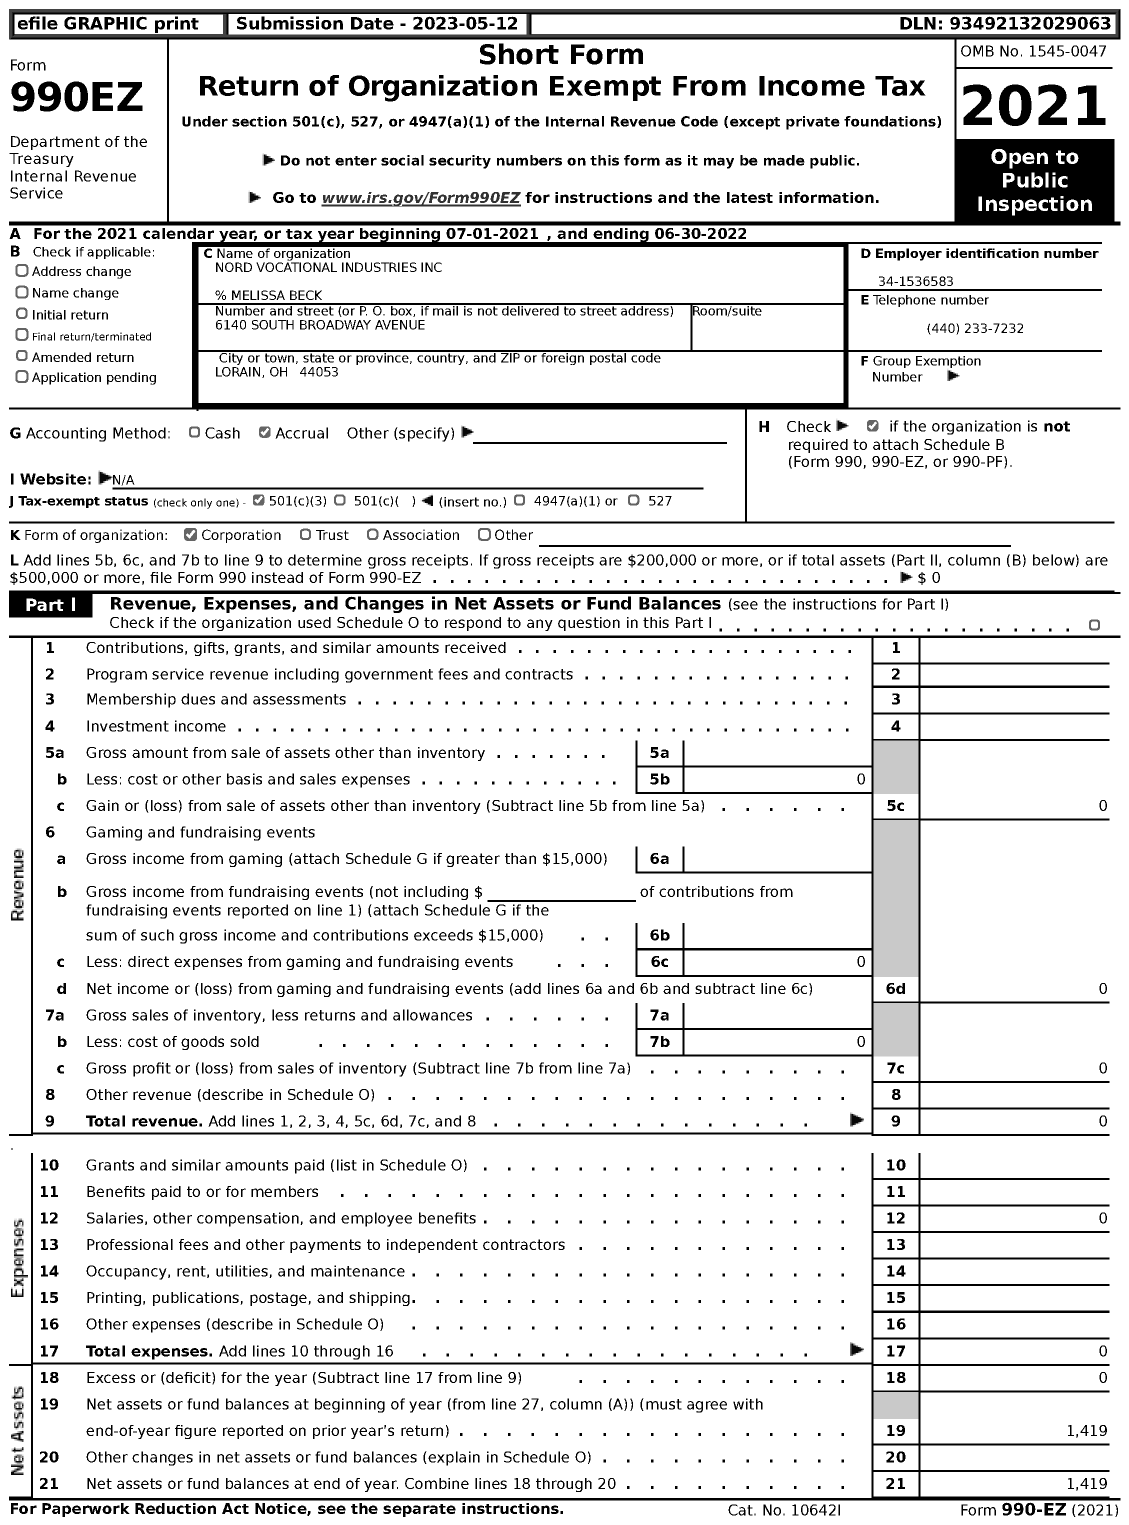 Image of first page of 2021 Form 990EZ for Nord Vocational Industries